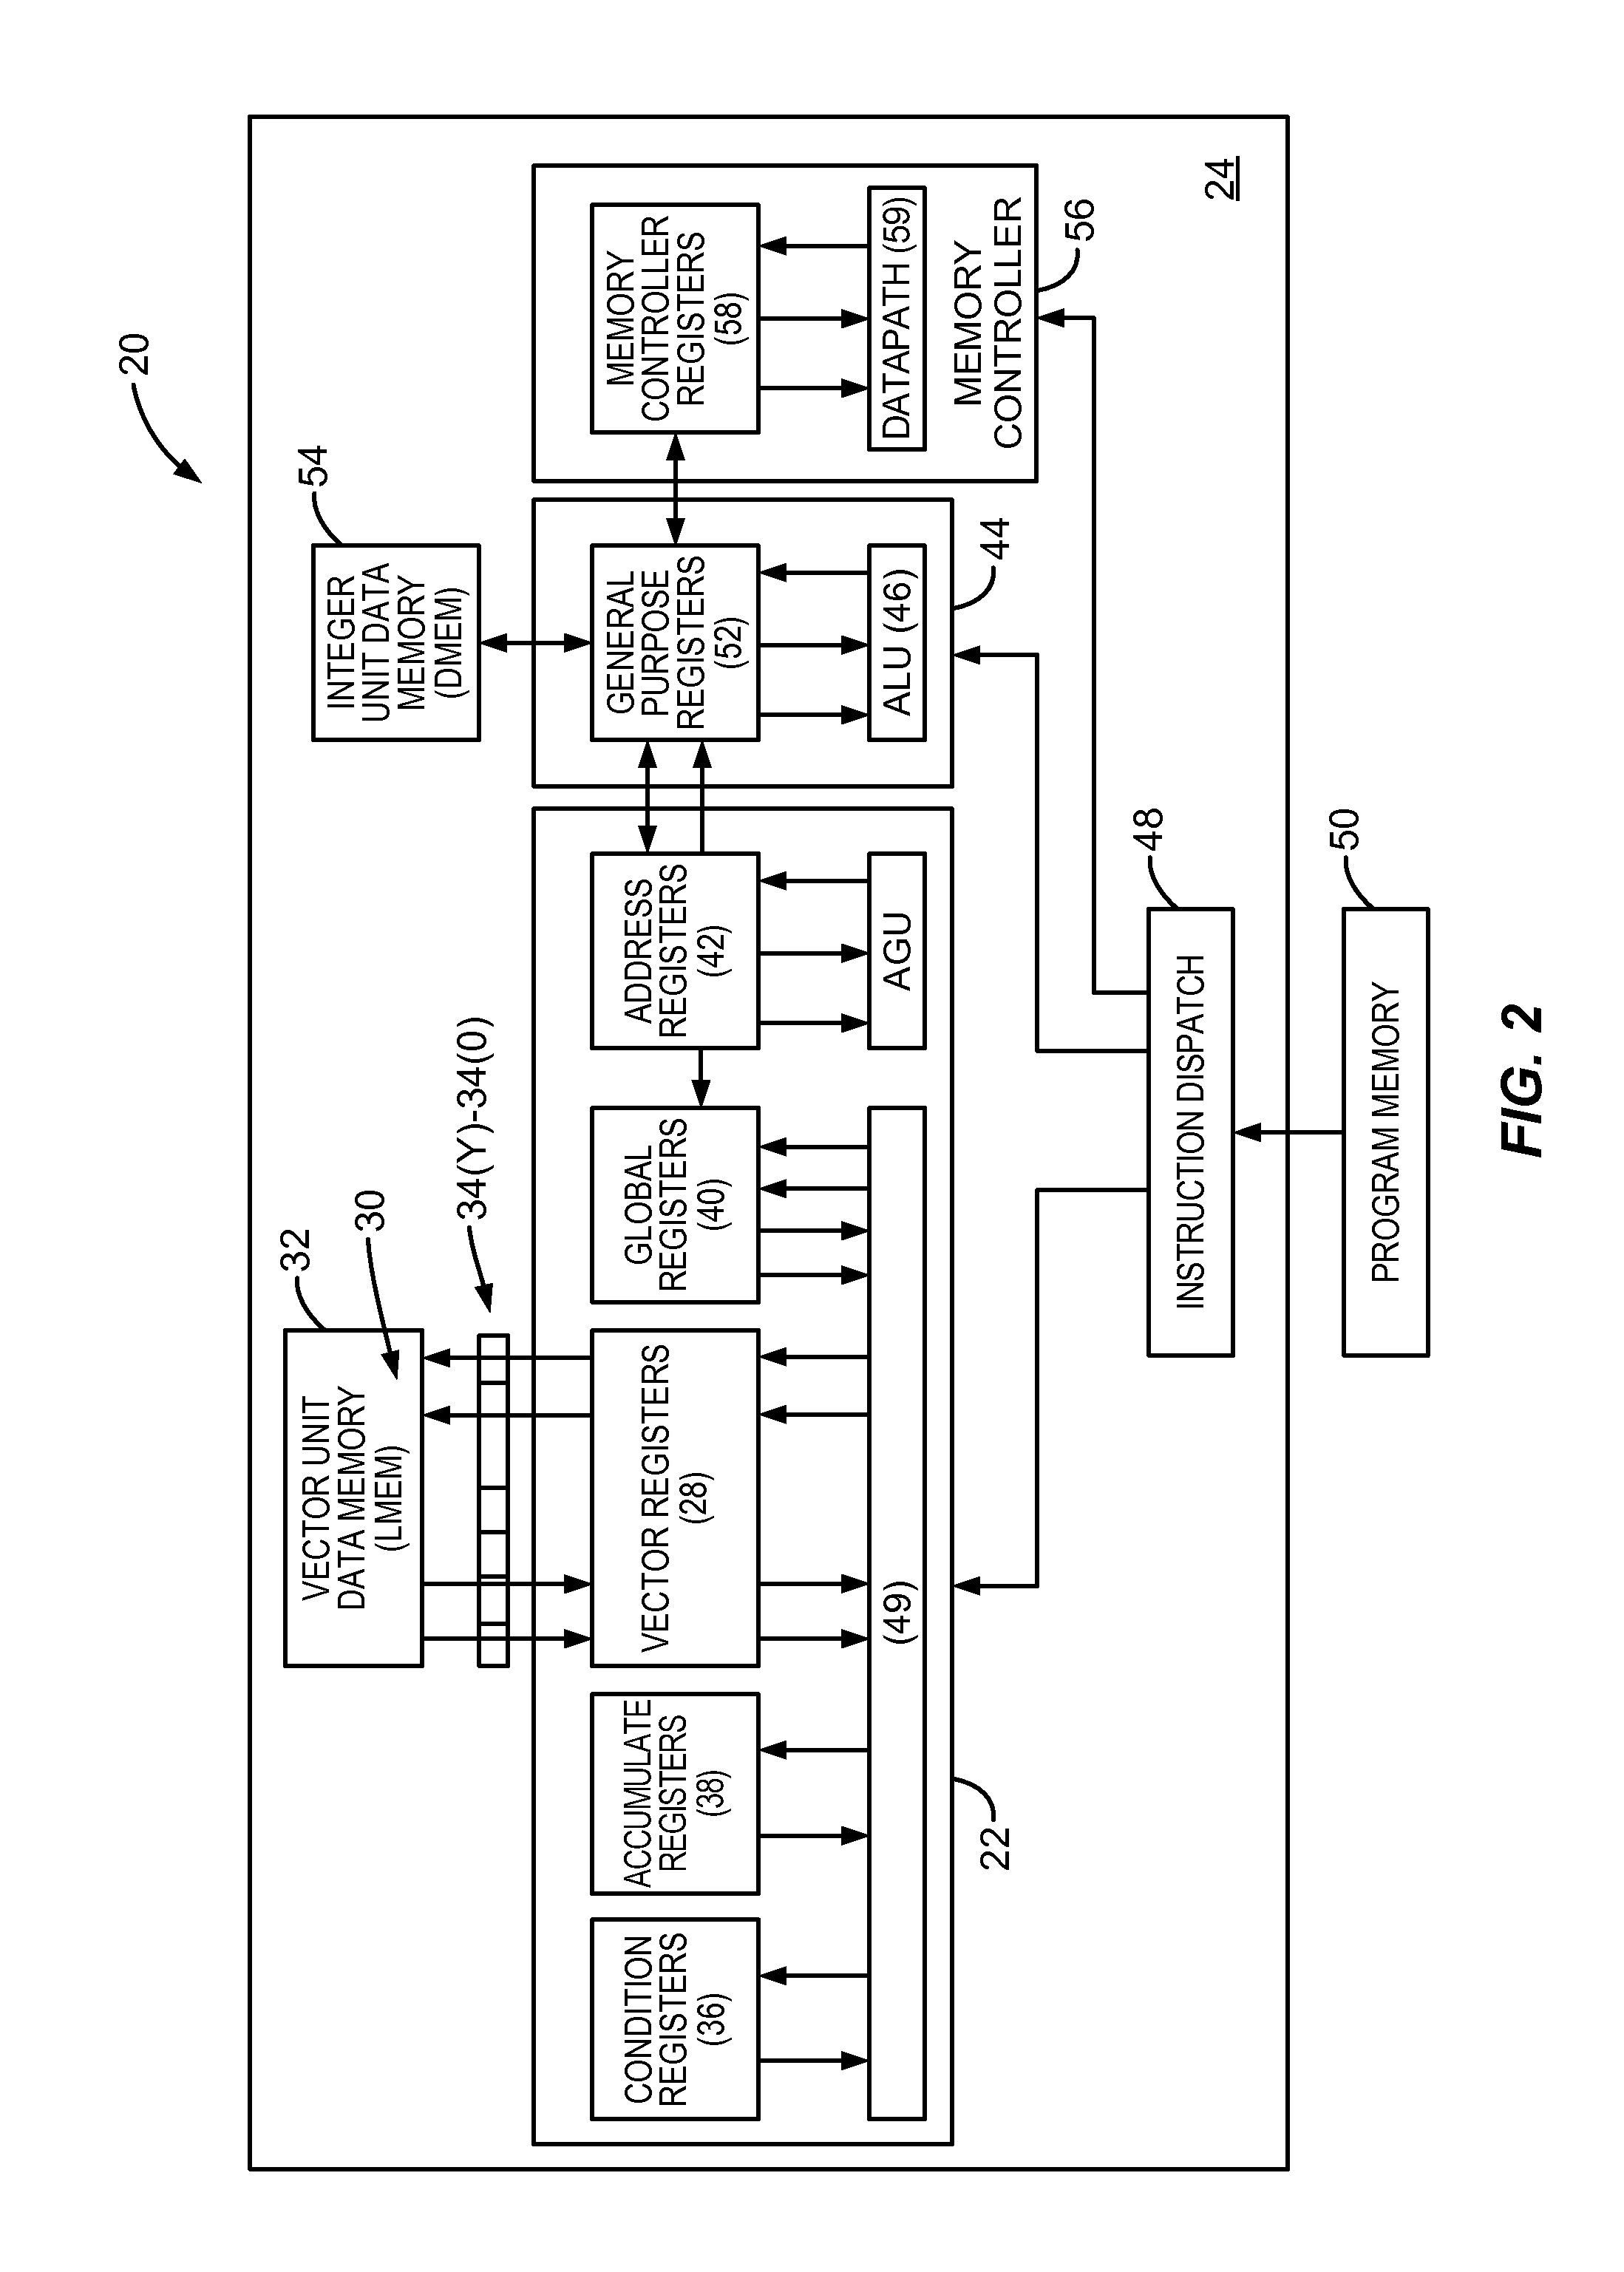 Vector processing carry-save accumulators employing redundant carry-save format to reduce carry propagation, and related vector processors, systems, and methods